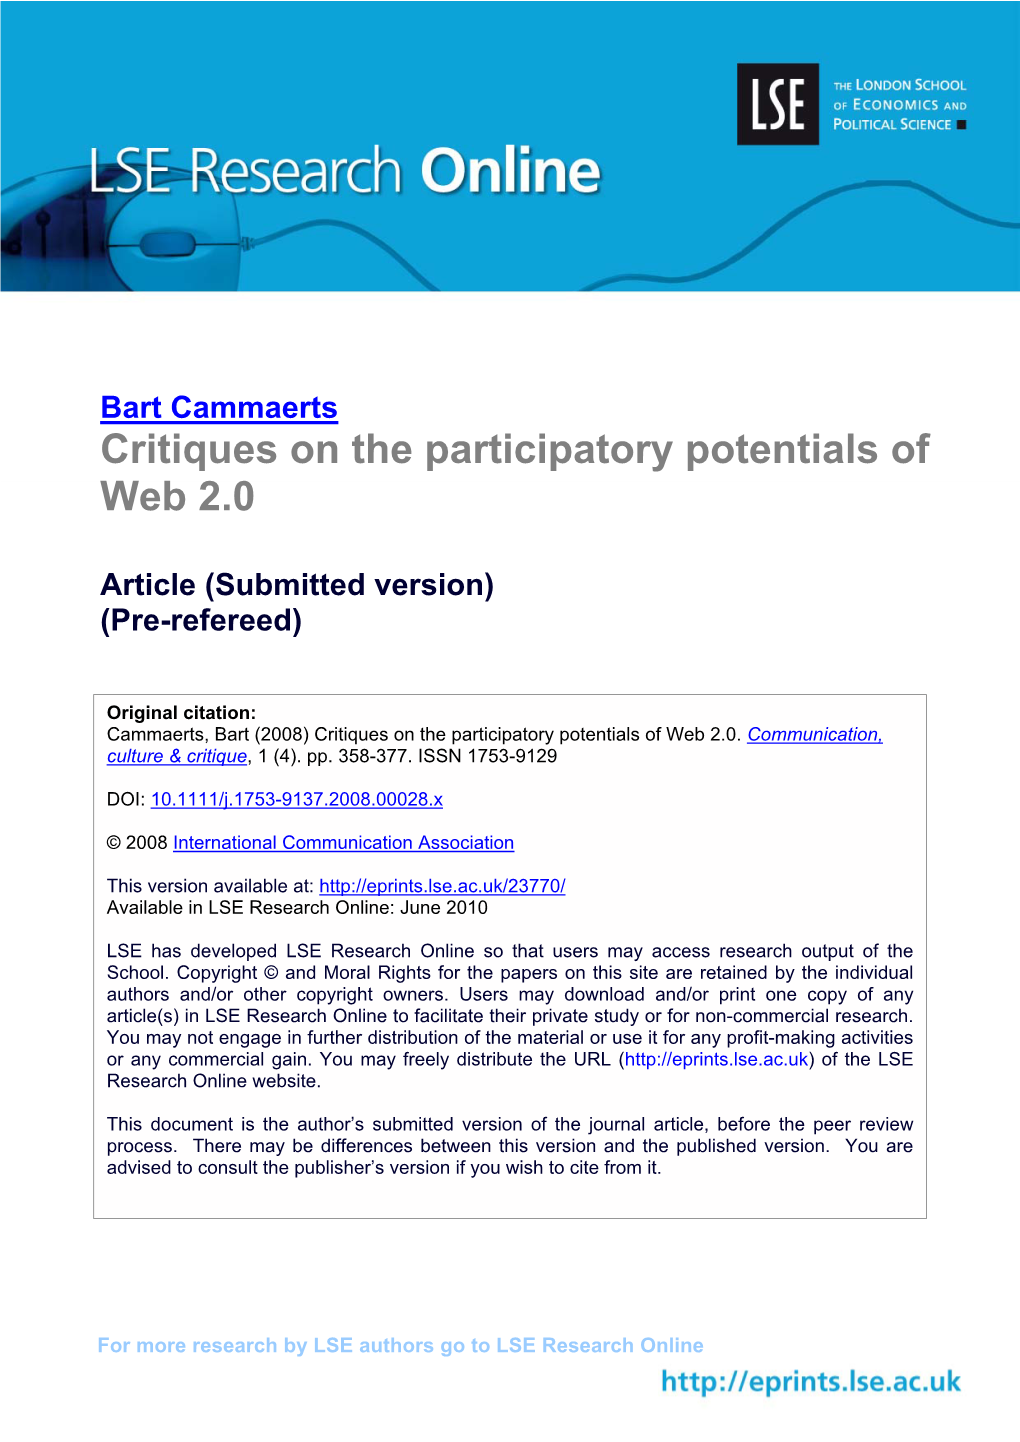 Critiques on the Participatory Potentials of Web 2.0